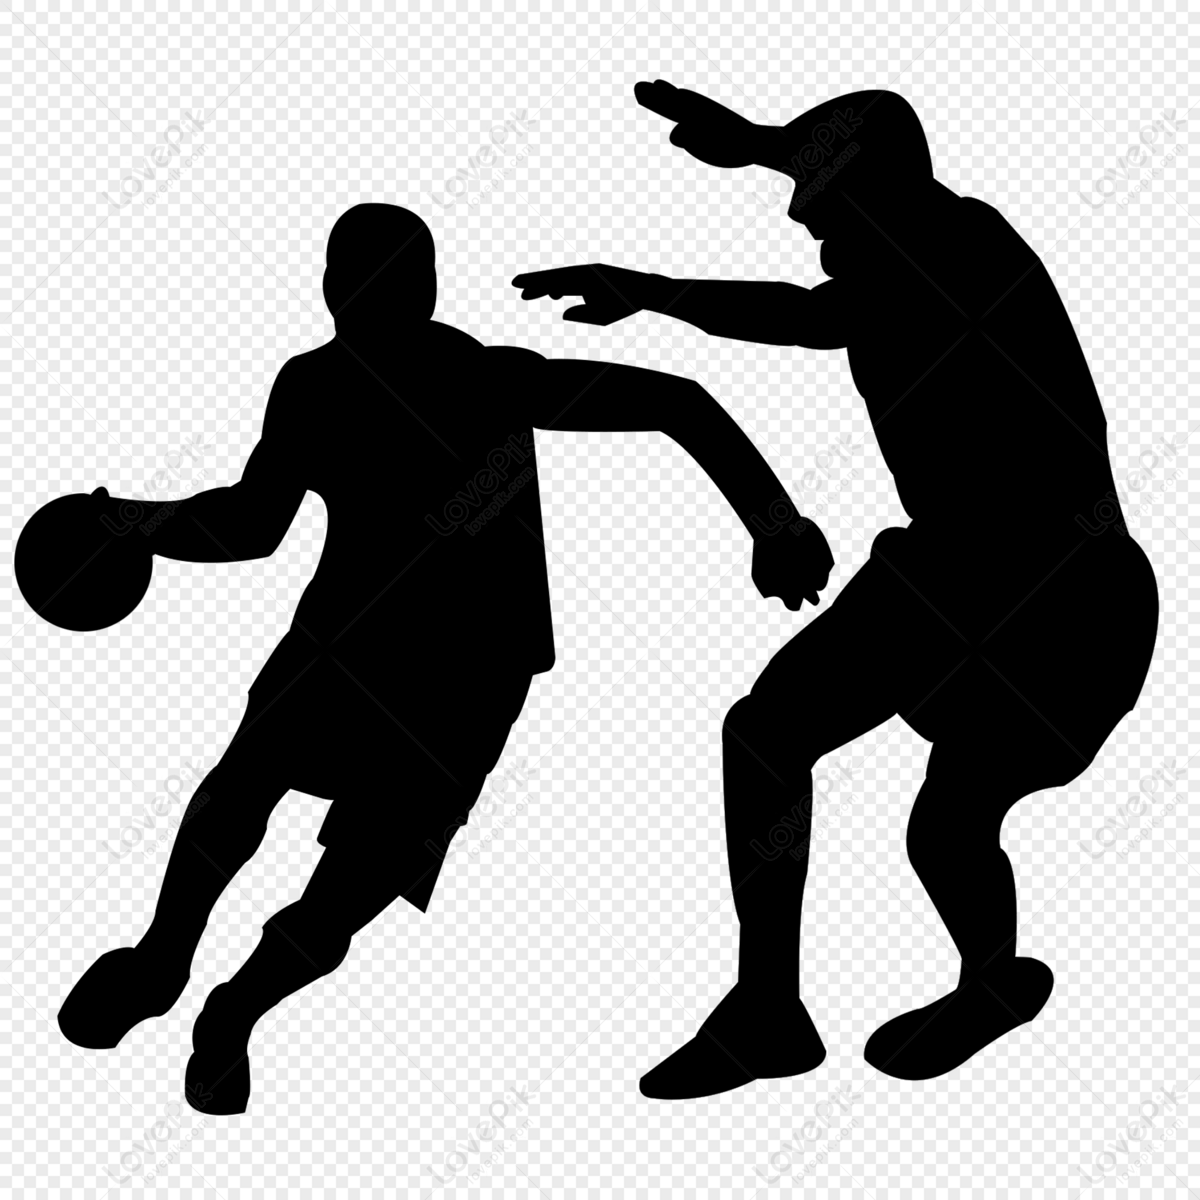 Basketball Player Silhouette Free Deduction Material Png Image And Psd File For Free Download Lovepik